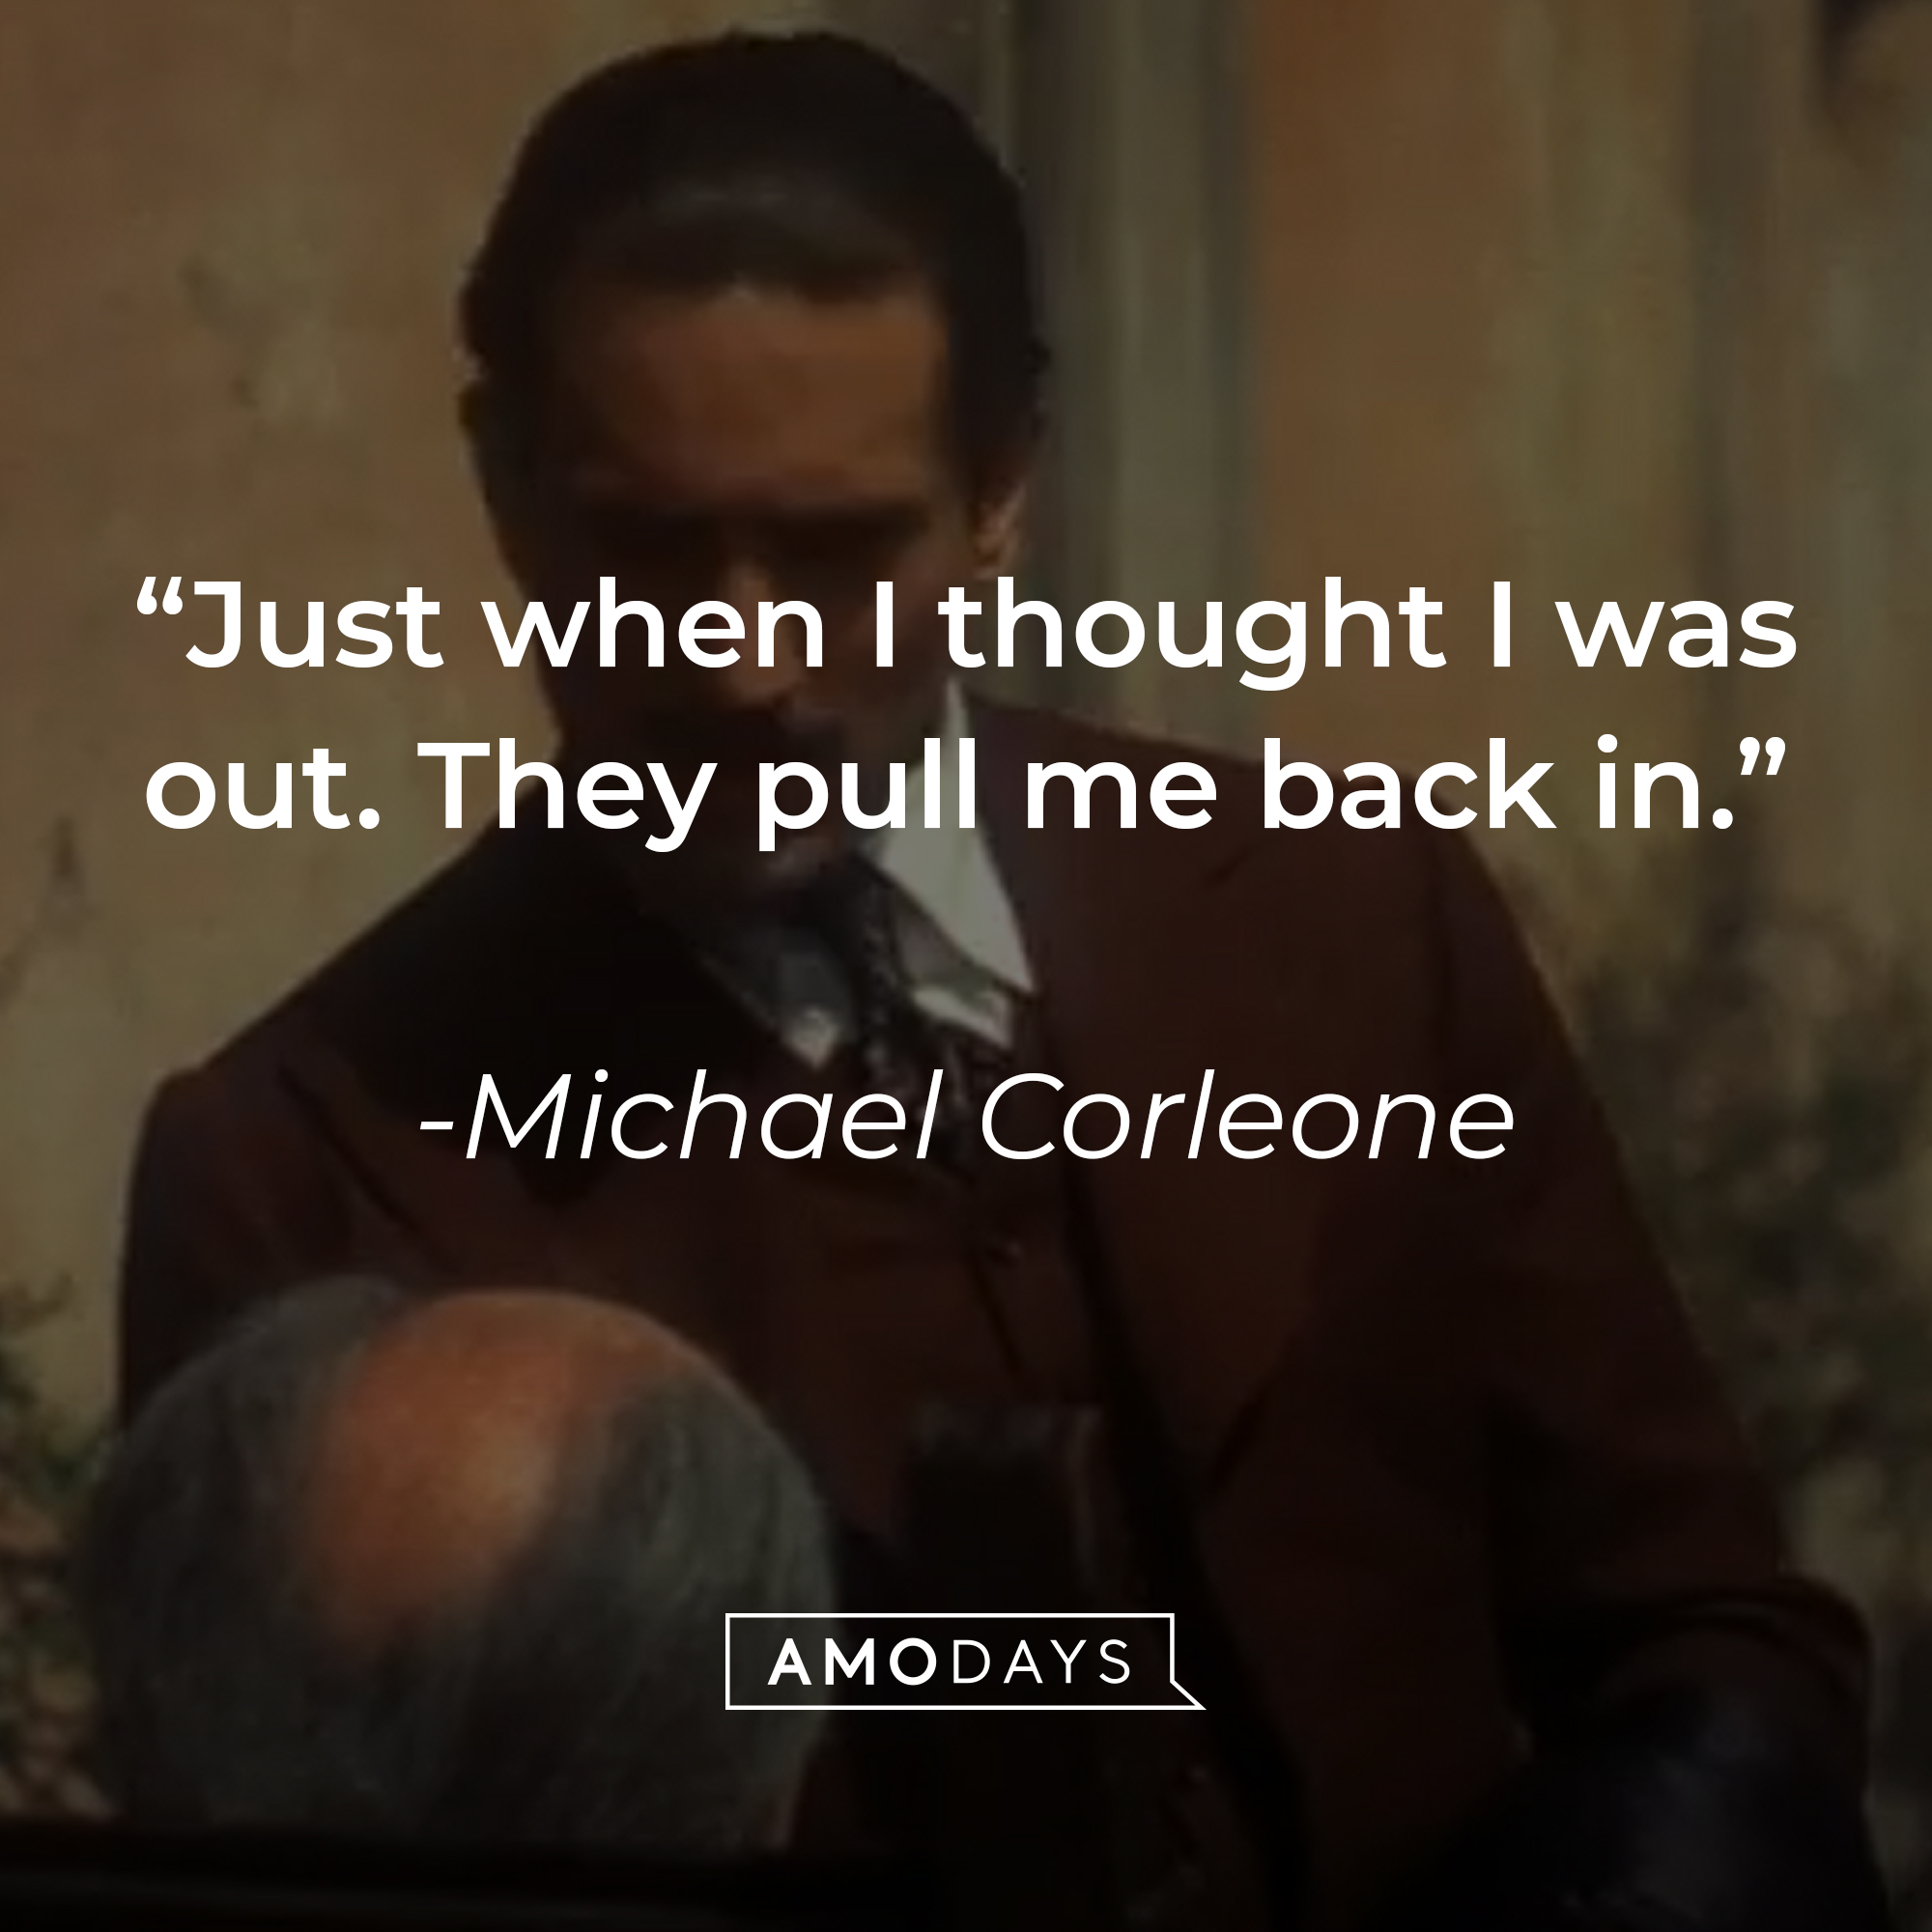 A photo from "The Godfather Part II" with the quote, "Just when I thought I was out. They pull me back in." | Source: YouTube/paramountmovies